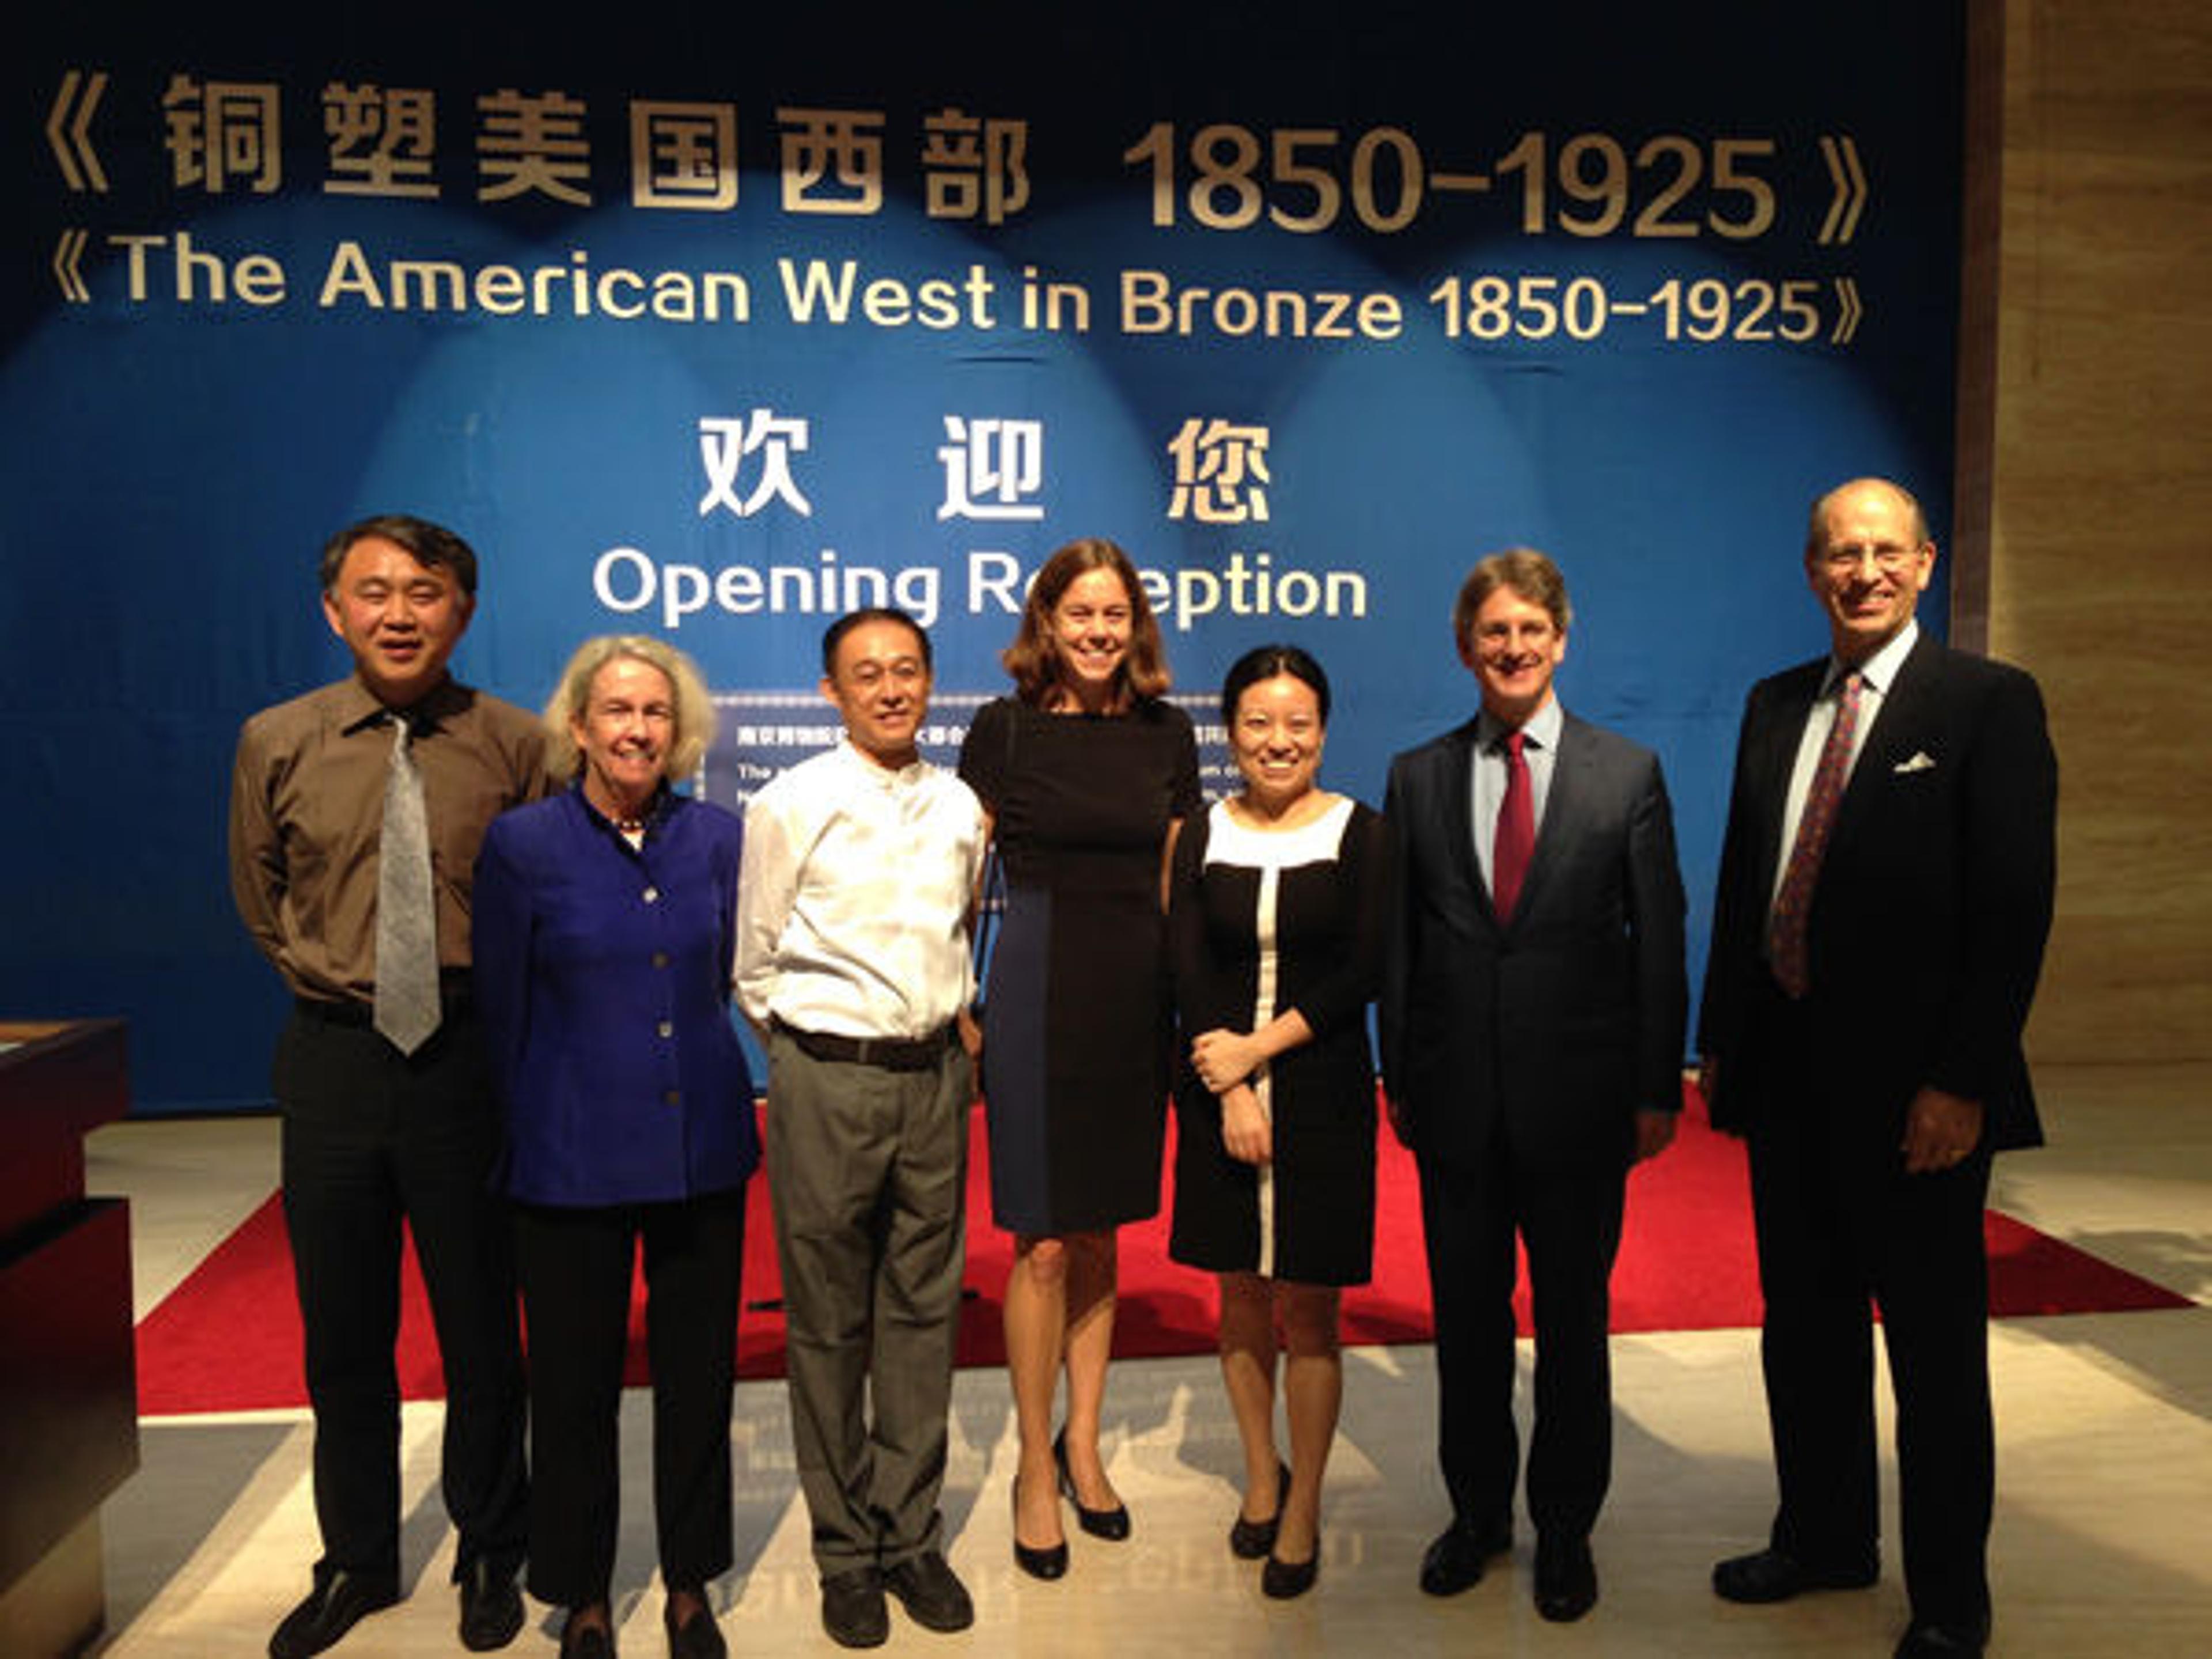 Left to right: Wang Qizhi, Vice Director, Nanjing Museum; Jennifer Russell, Associate Director for Exhibitions, MMA; Chen Tongle, Head of Exhibitions, Nanjing Museum; Thayer Tolles, Marica F. Vilcek Curator of American Paintings and Sculpture, MMA; Heng Wu, Deputy Director of Cultural Exchange Centre, Nanjing Museum; Thomas P. Campbell, Director, MMA; Maxwell Hearn, Douglas Dillon Chairman of Asian Art, MMA